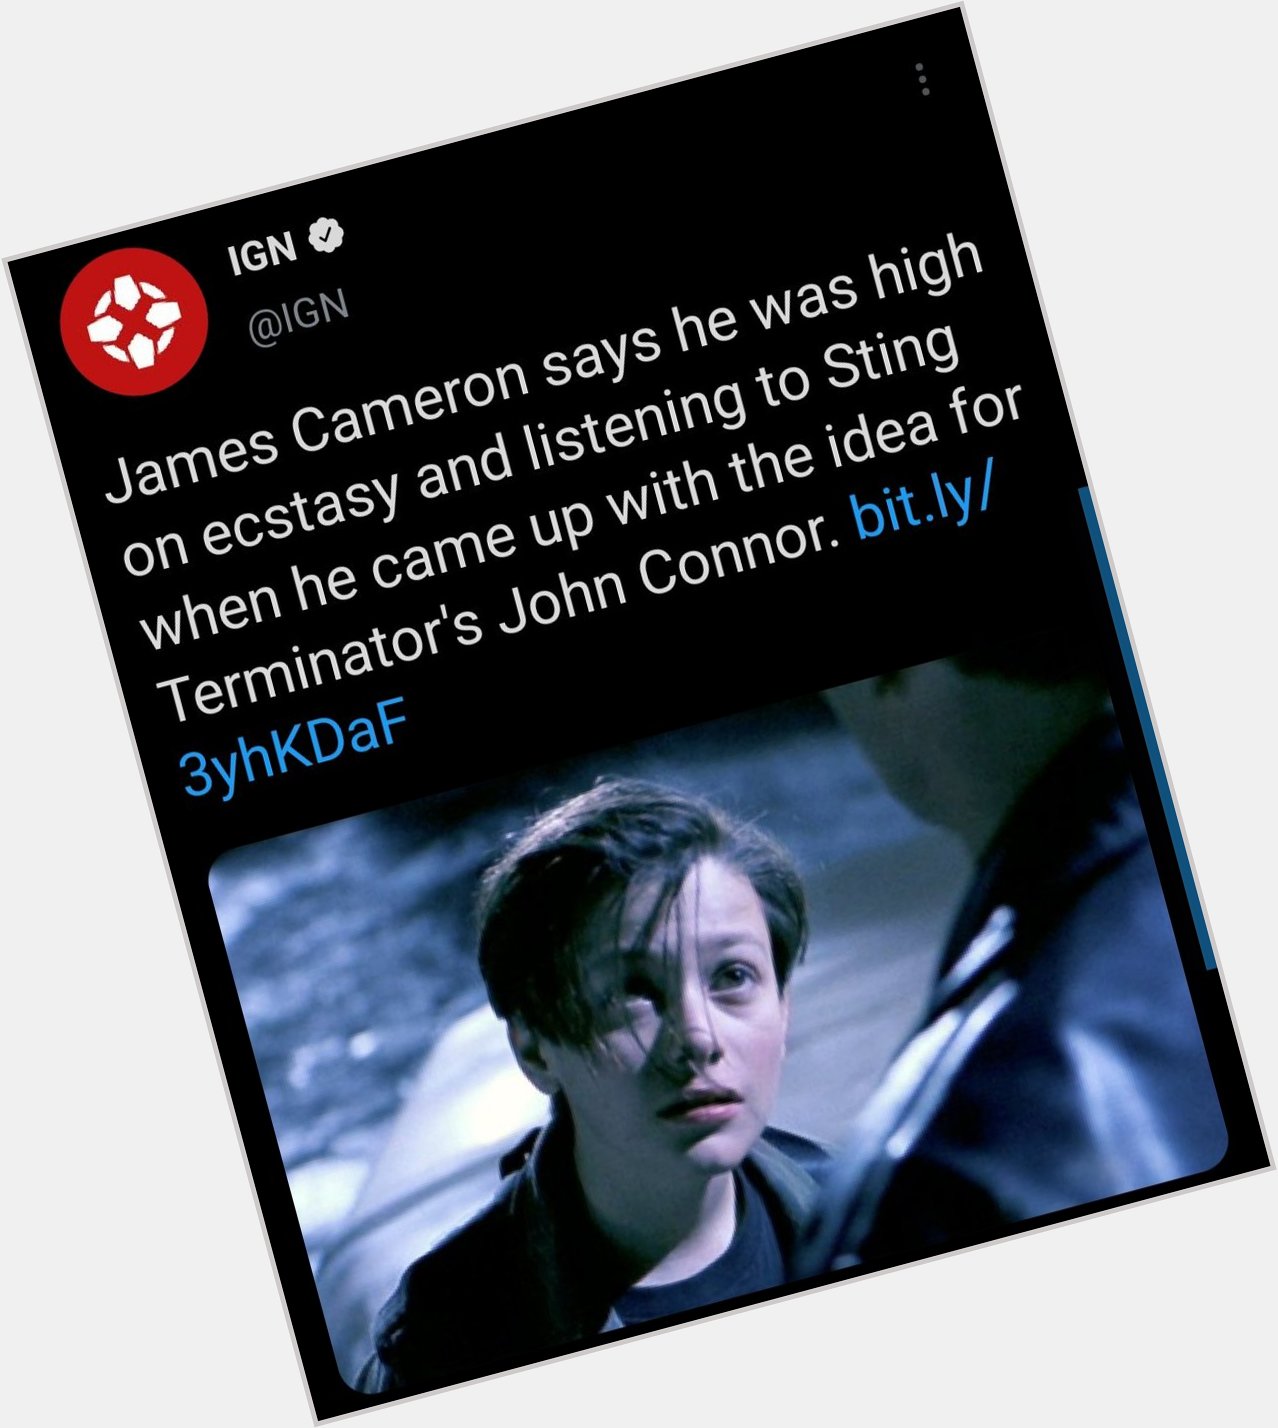 Happy birthday to james cameron, he took one for the team 